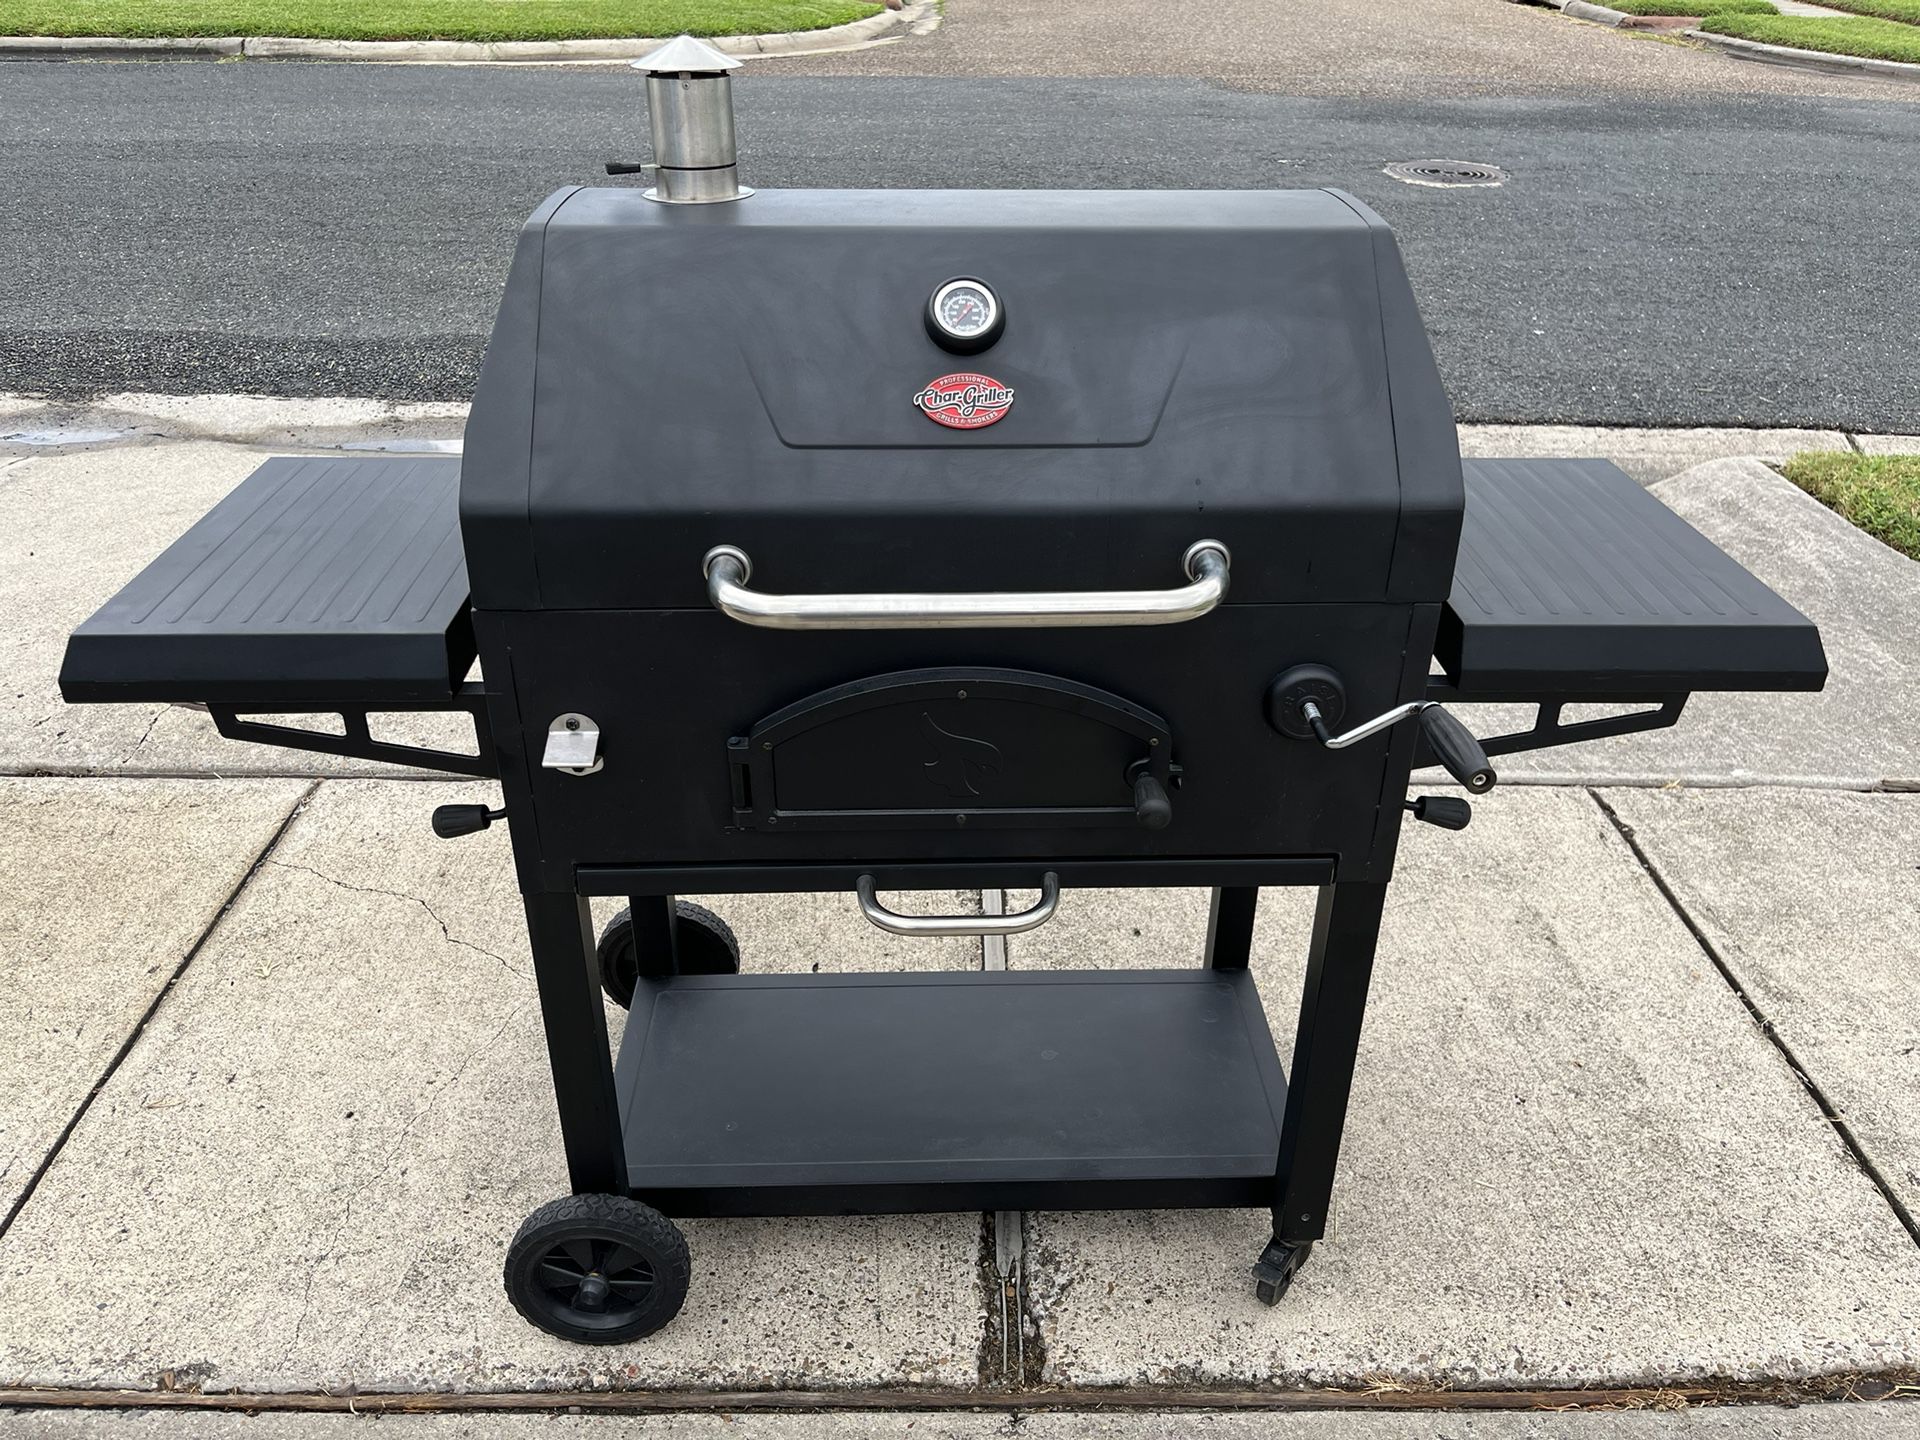 Legacy Charcoal Grill - Char-Griller